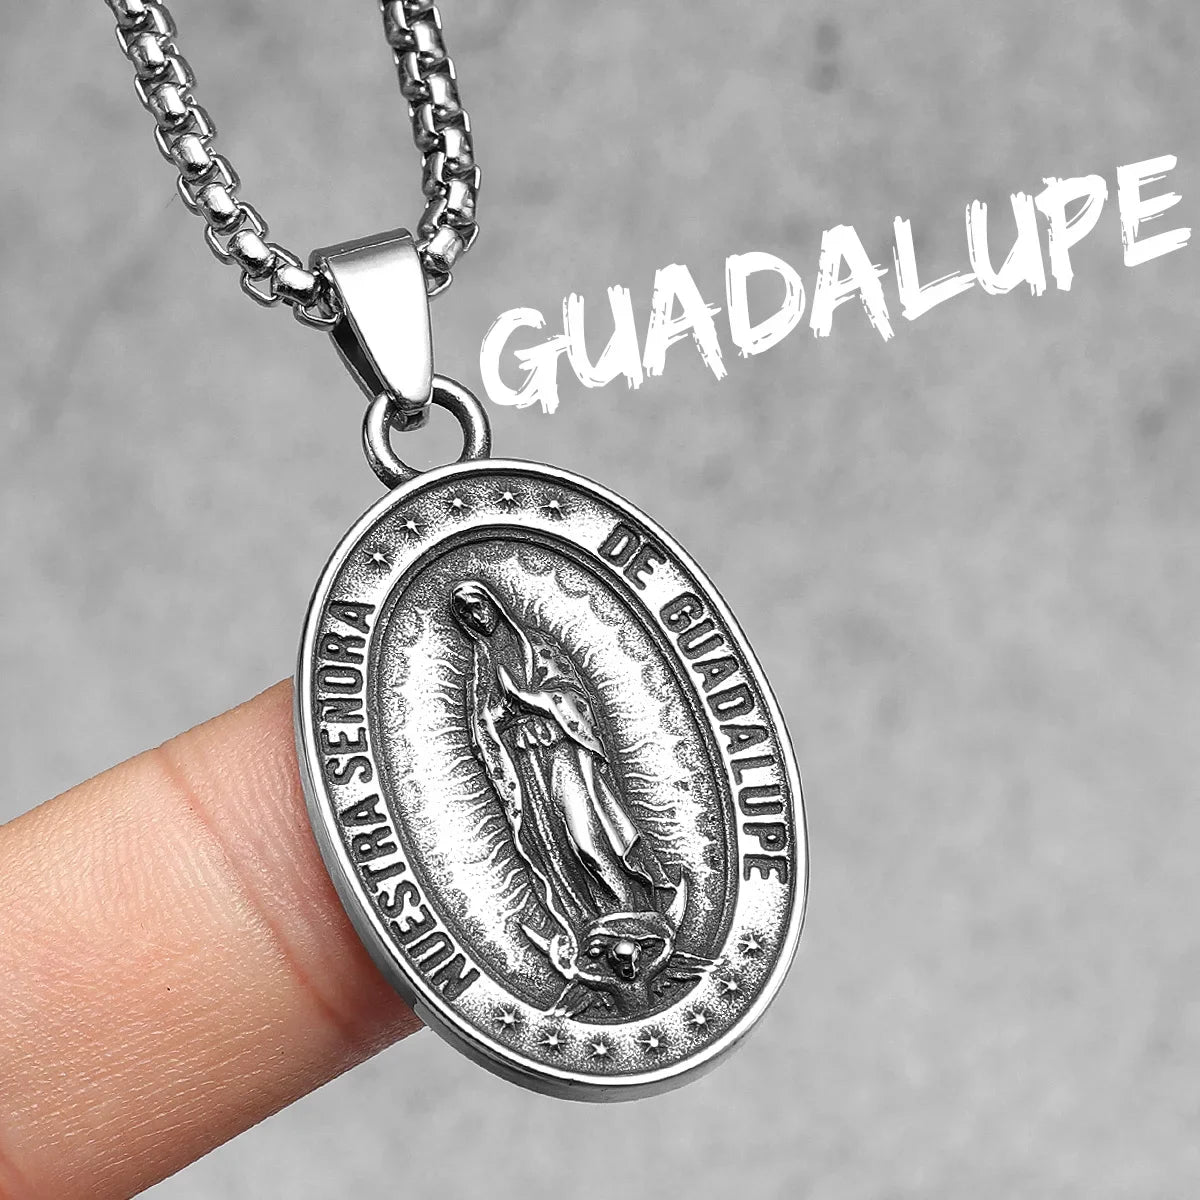 Virgin Mary Guadalupe Angel Cross Stainless Steel Men Necklaces Pendant Chain Amulet For Women Fashion Jewelry Gifts Virgin Mary-G